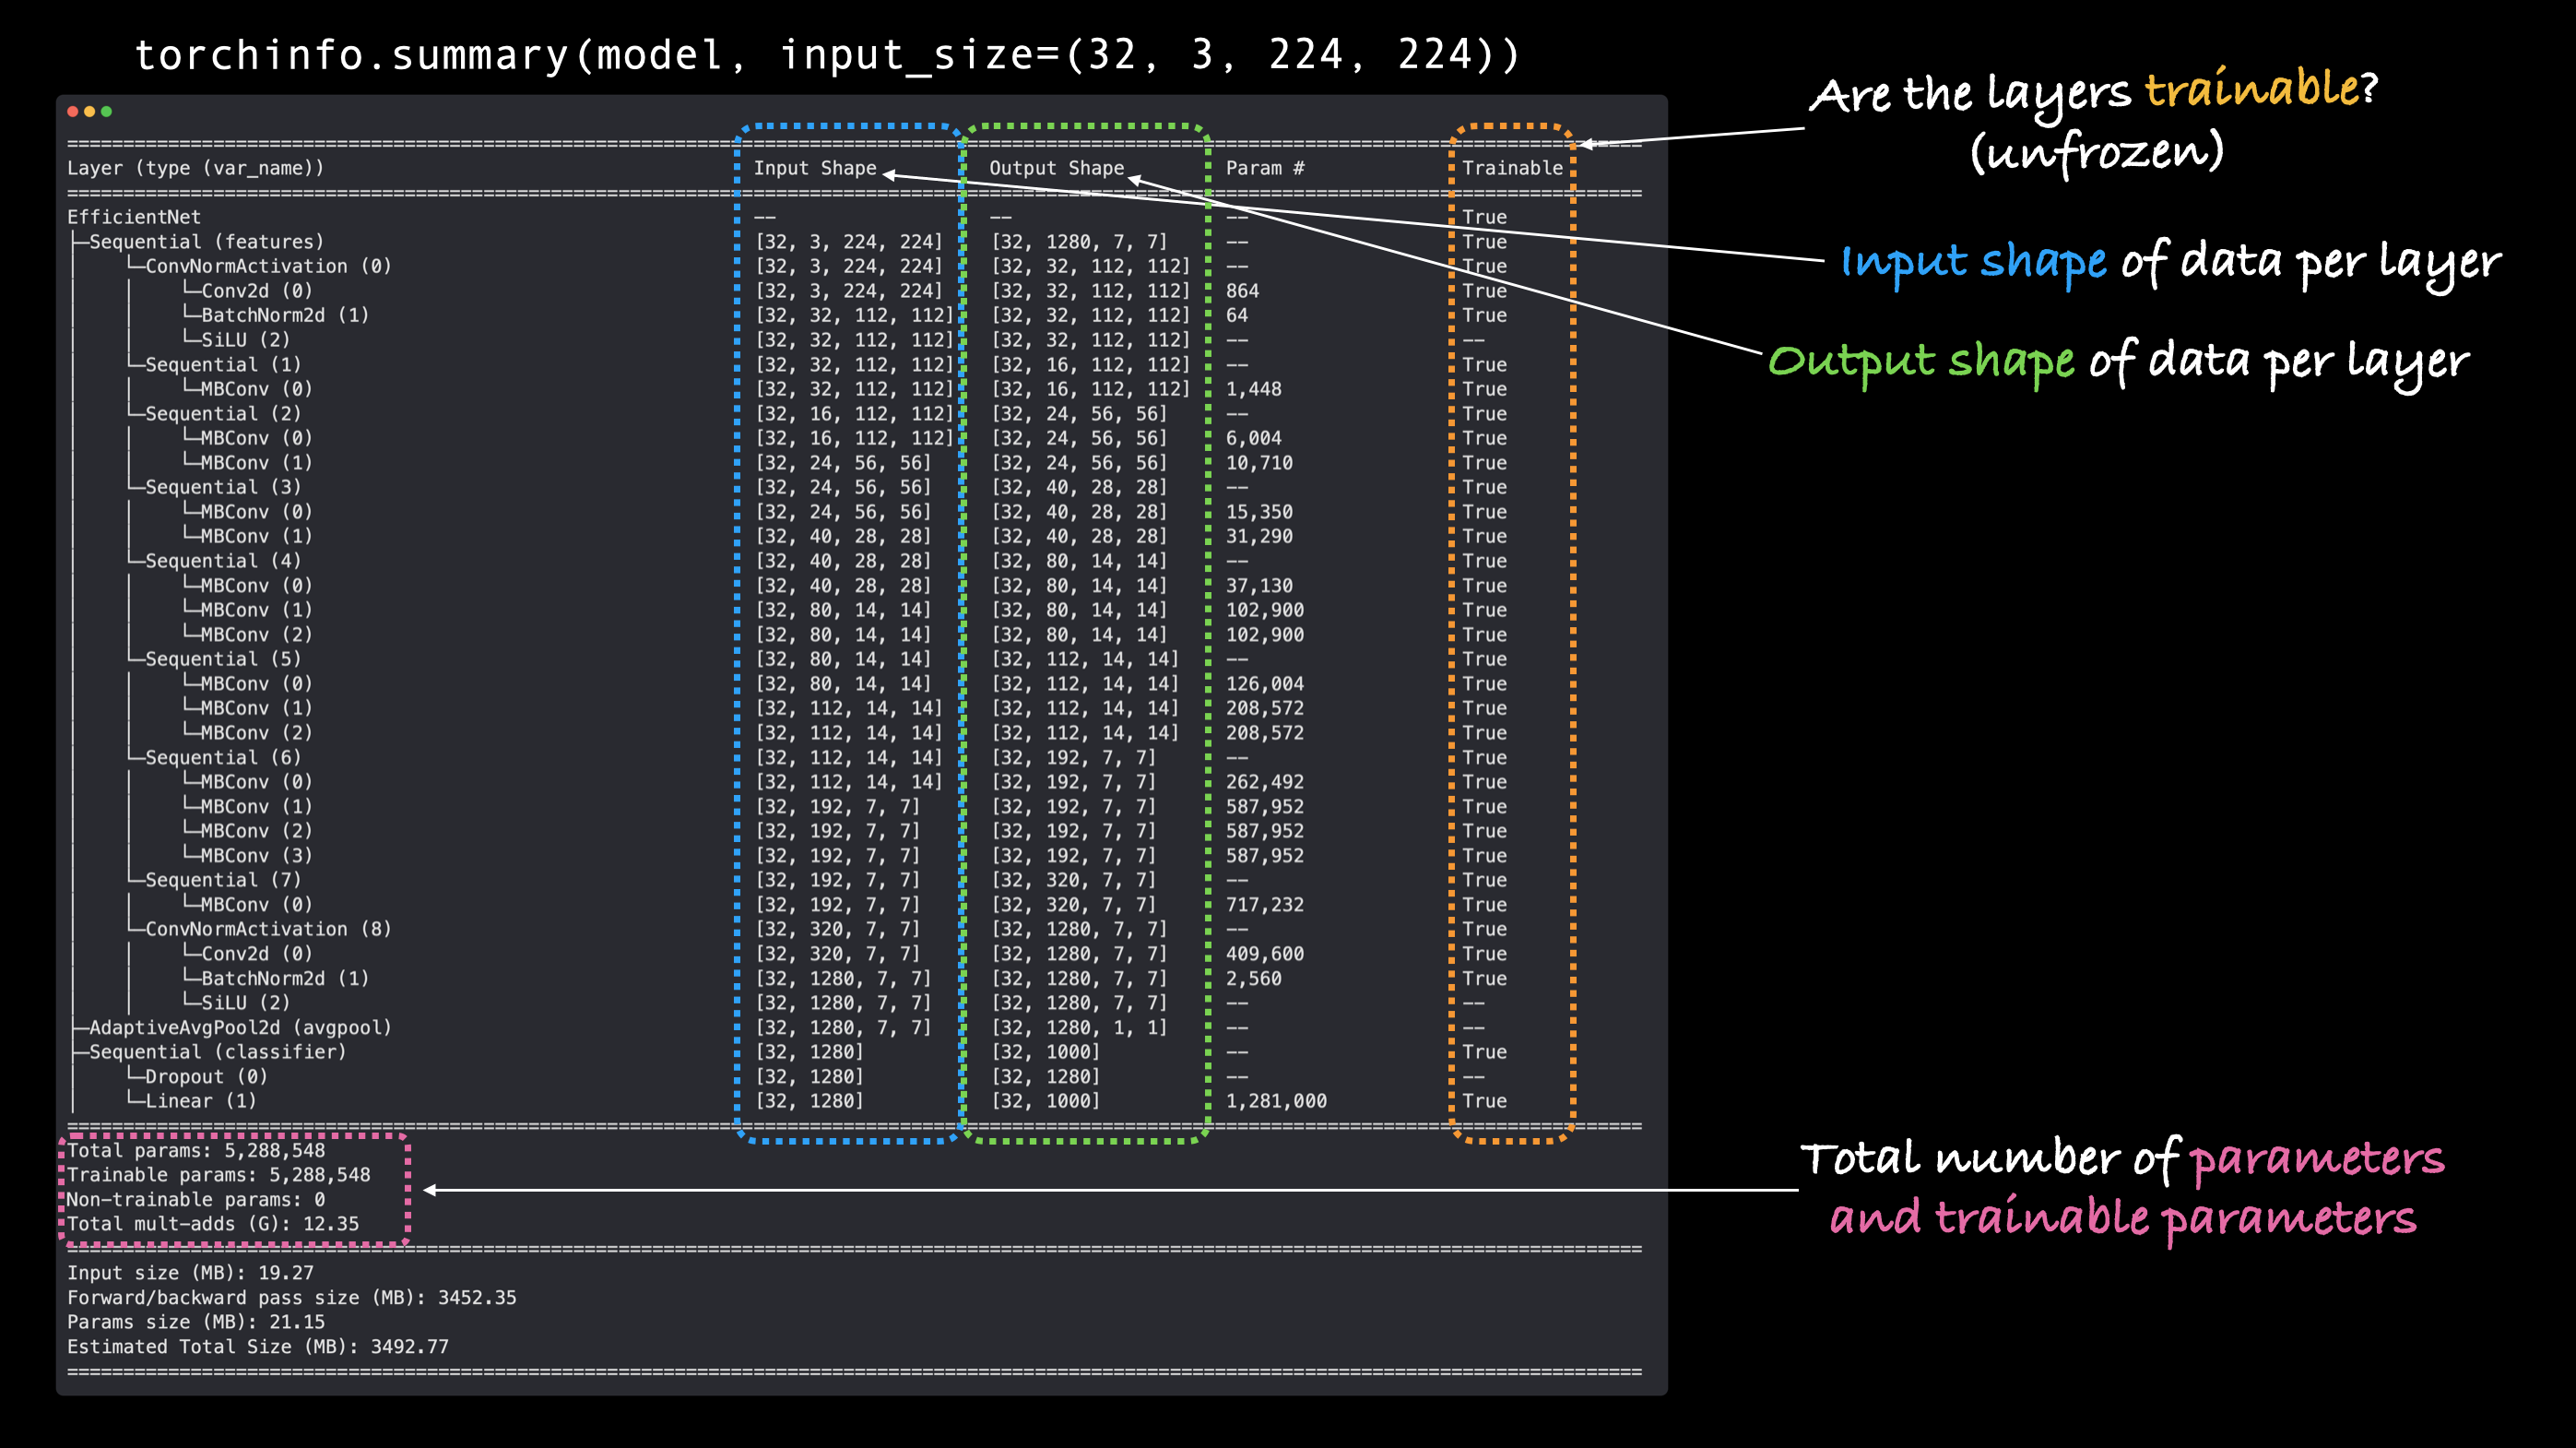 output of torchinfo.summary() when passed our model with all layers as trainable